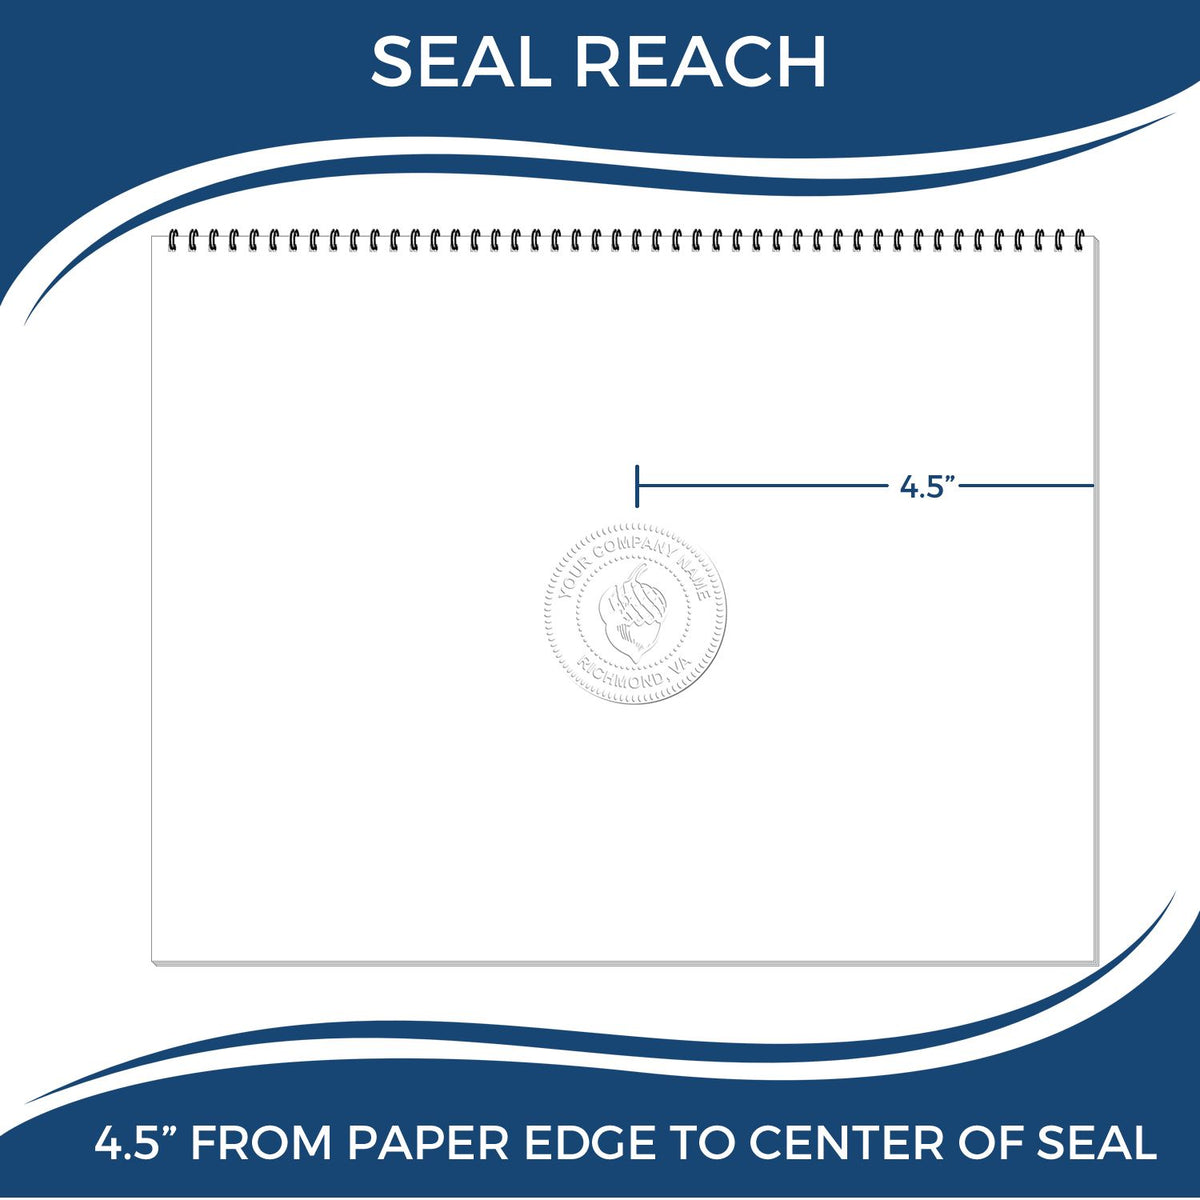 An infographic showing the seal reach which is represented by a ruler and a miniature seal image of the Extended Long Reach Louisiana Architect Seal Embosser